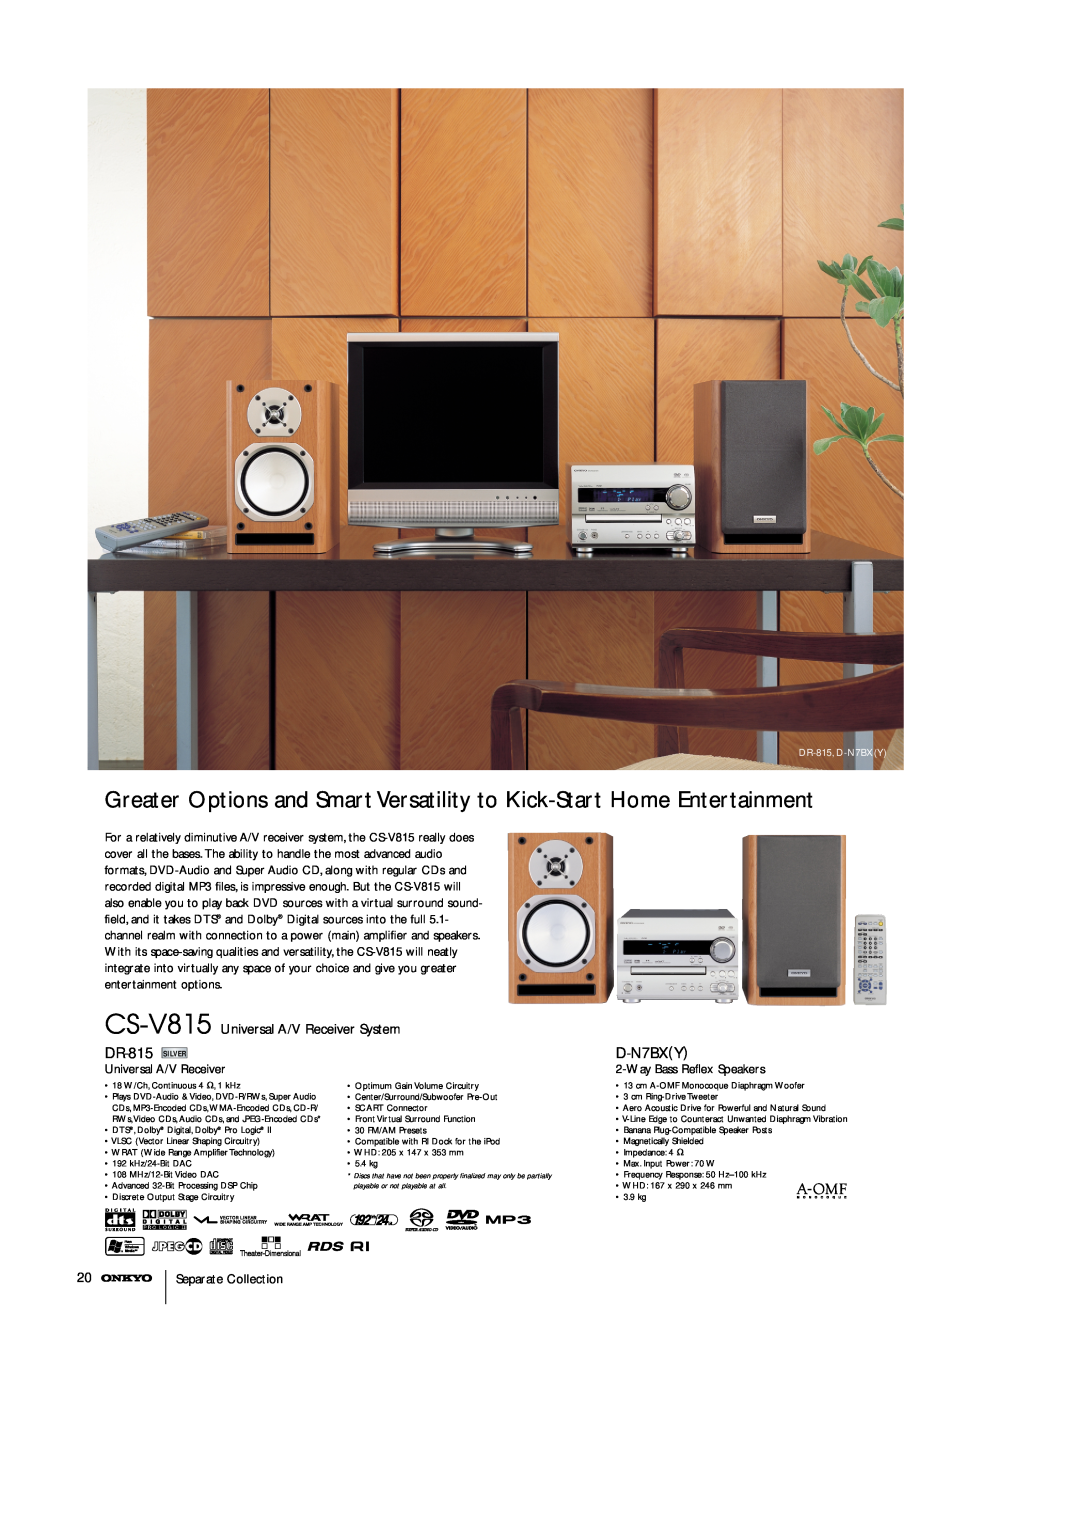 Onkyo T-4211, A-9211 CS-V815 Universal A/V Receiver System, DR-815, D-N7BXY, WayBass Reflex Speakers, Separate Collection 